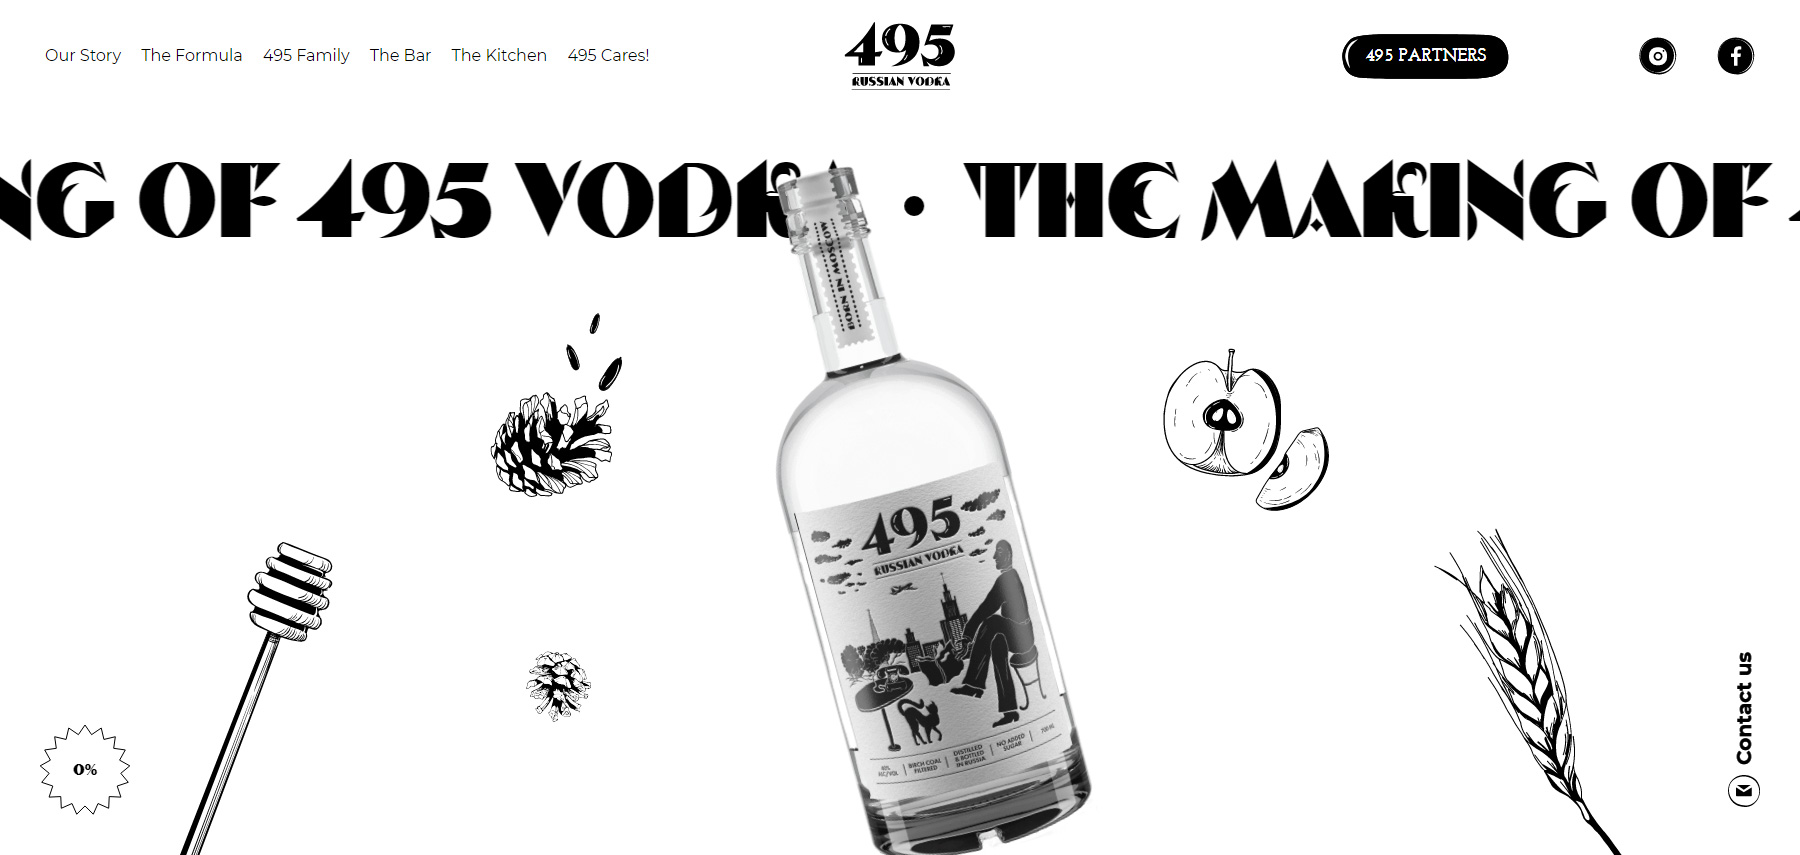 495 Vodka - Website of the Day